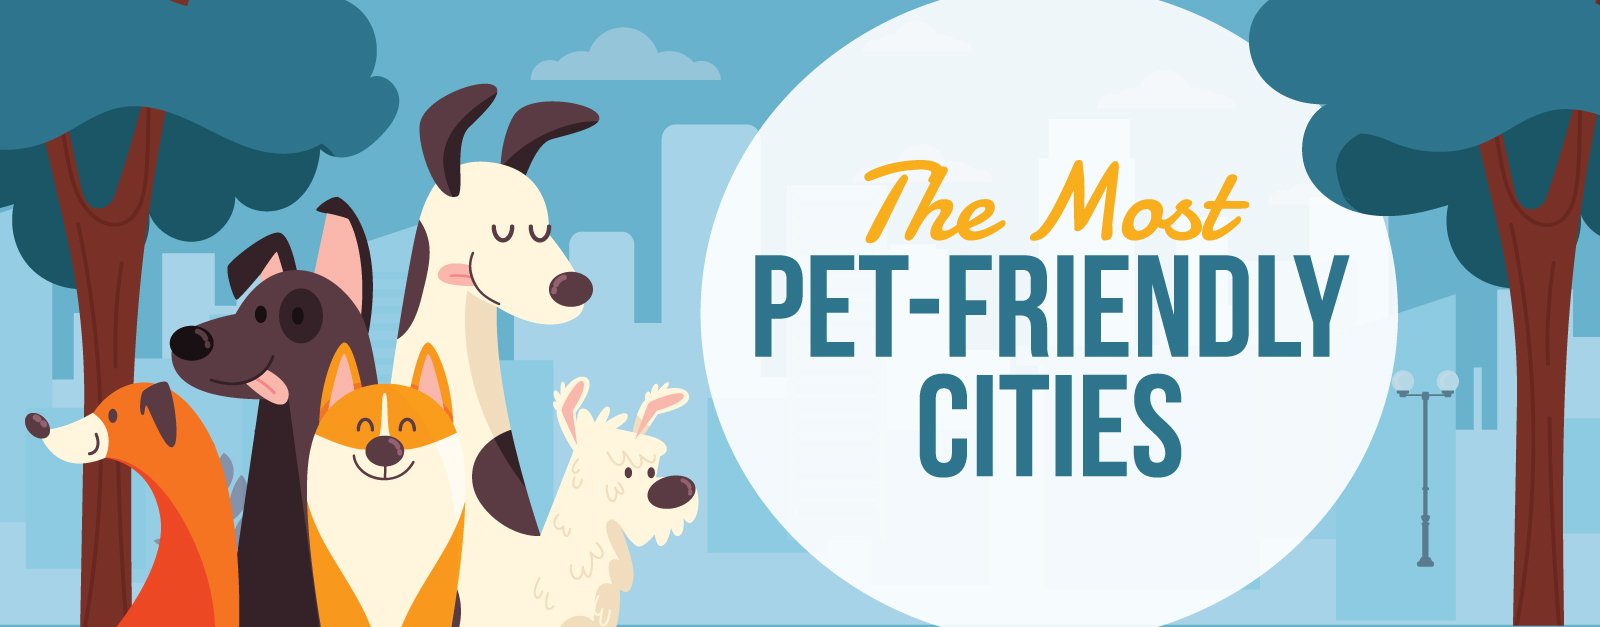 The header image for the article; contains the text "The most pet-friendly cities" and a cartoon graphic of five dogs.